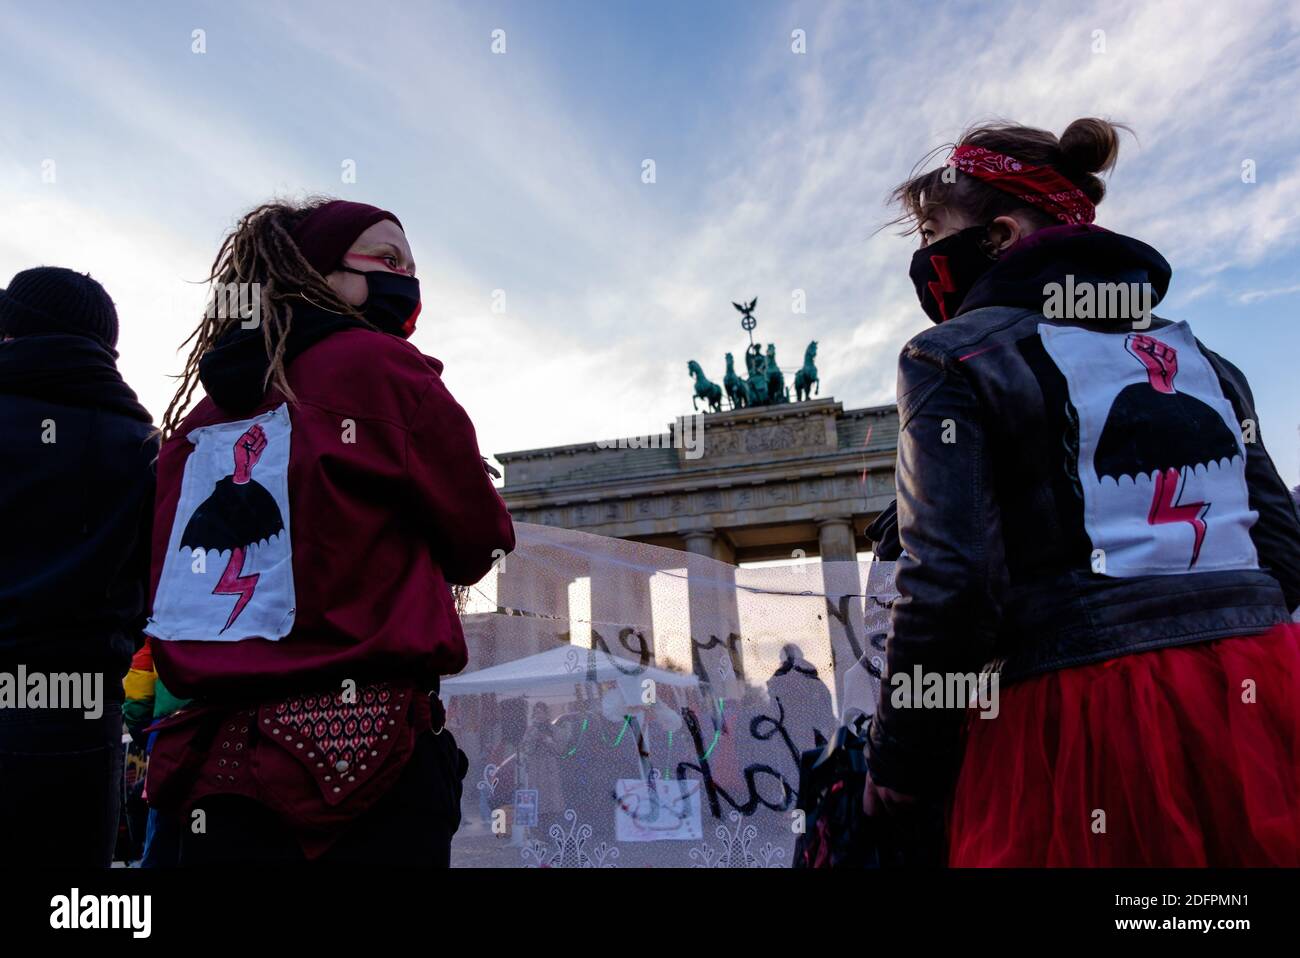 Germany, Berlin, December 06, 2020: Two activists wear a patch of a red lightning bolt, symbol of the Strajk Kobiet in Poland, as queer feminist activist groups rally against patriarchal and repressive behavior at the Pariser Platz in front of the Brandenburg Gate. The organizers want to draw attention to the increased sexism and domestic violence during quarantine as a consequence of the worldwide Covid-19 pandemic and criticize the current legal situation regarding abortion in both Poland and Germany. Poland's constitutional court, controlled by the national populist ruling party PiS, has de Stock Photo